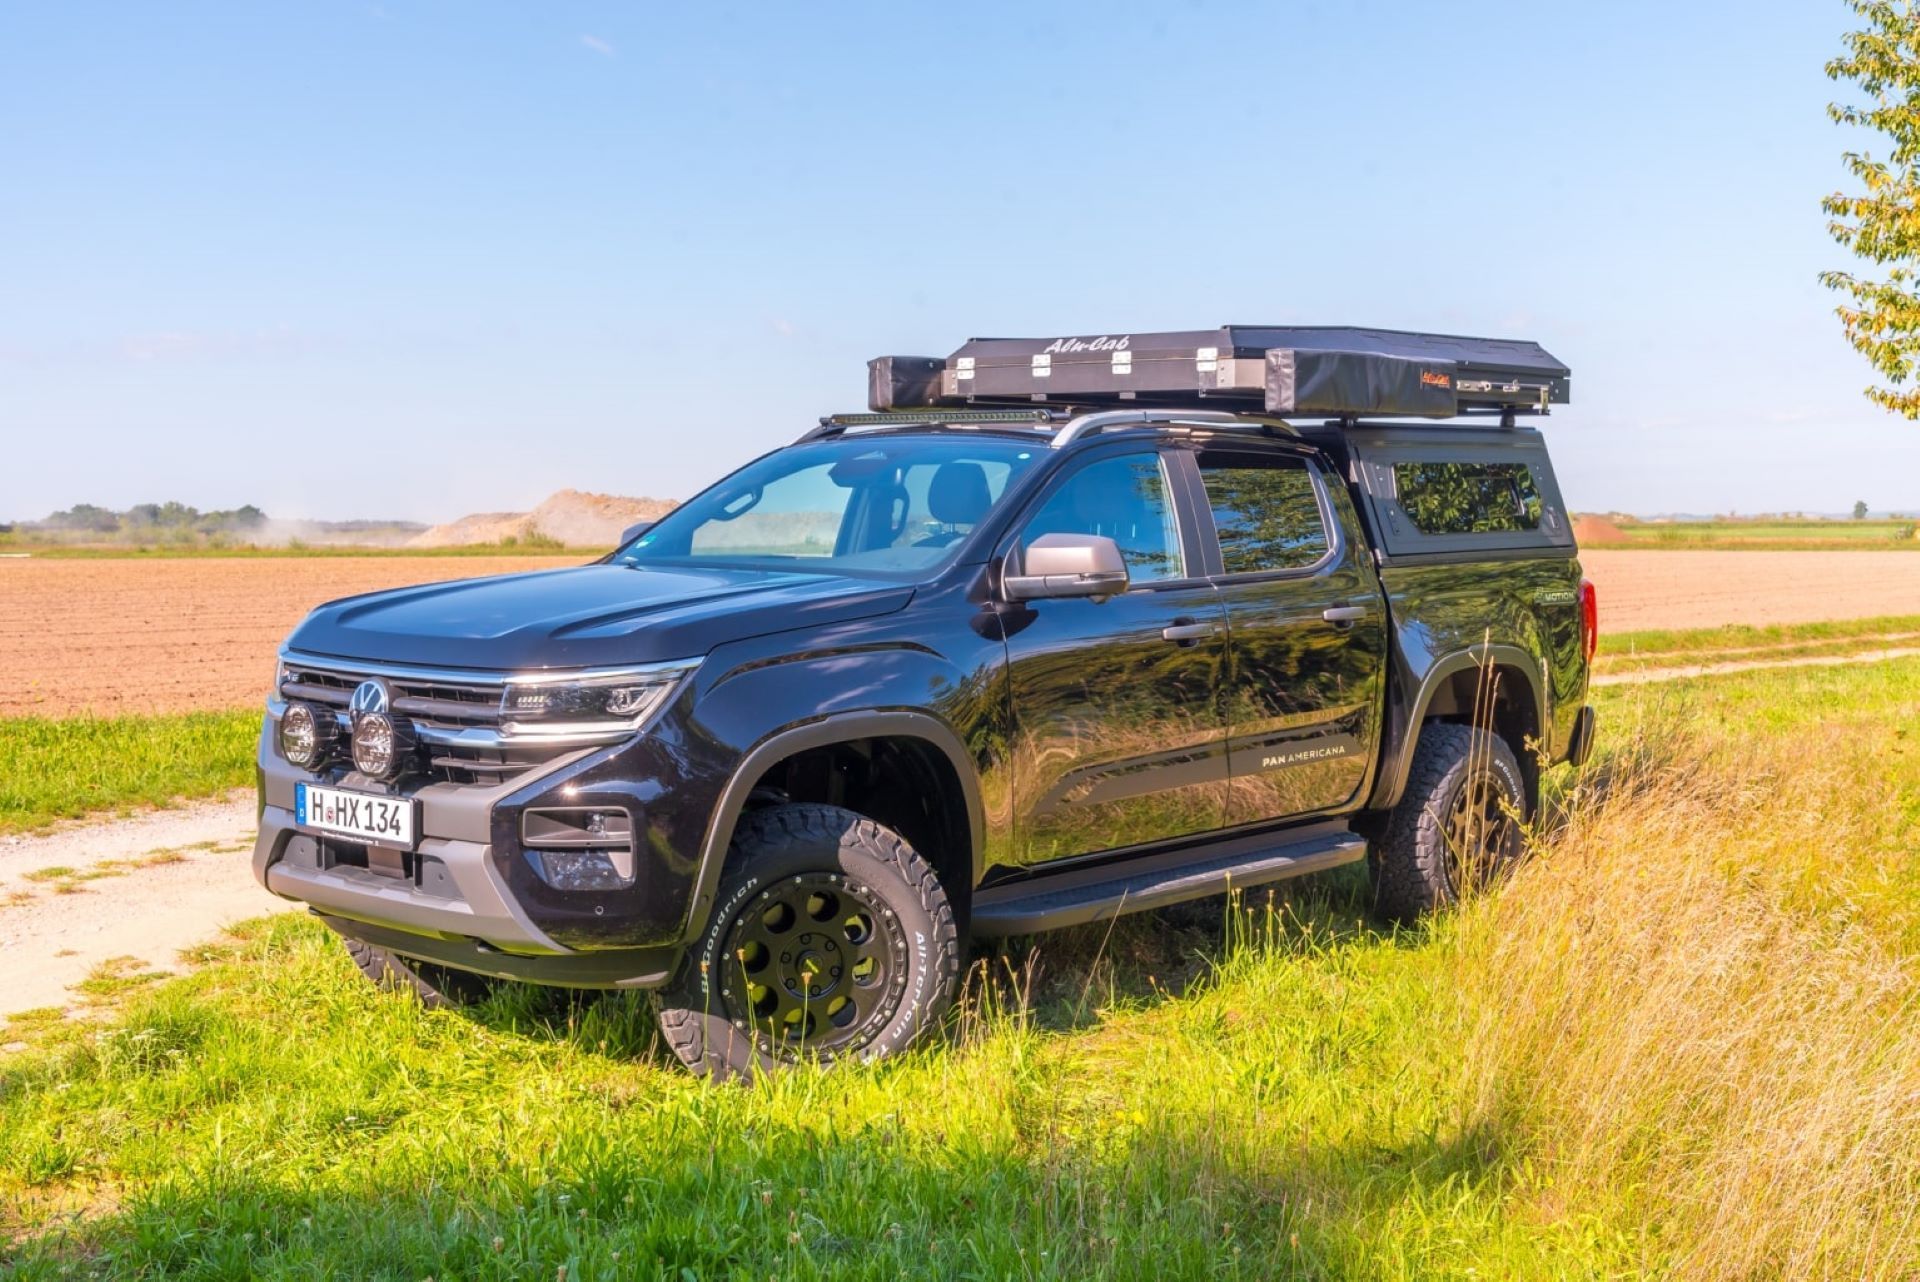 New Amarok as camper van with rooftop tent and hardtop – Car Site